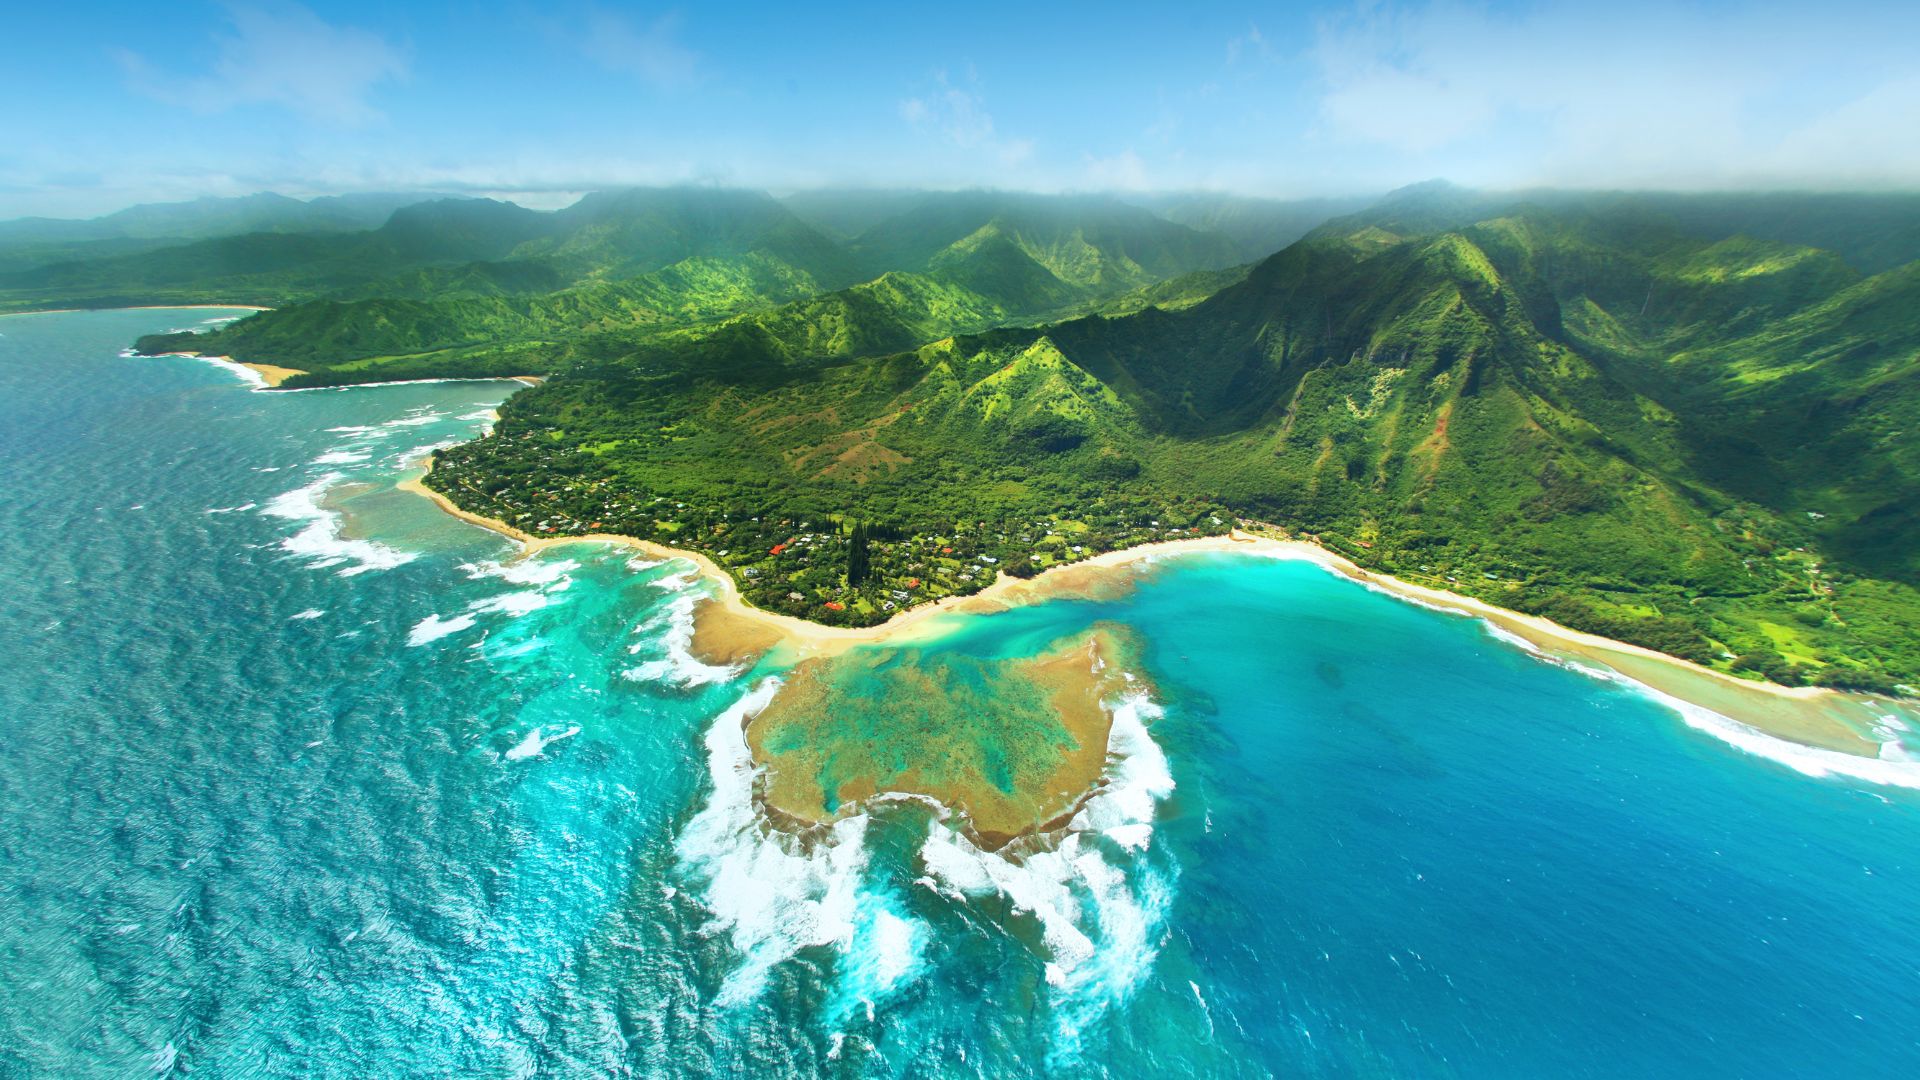 20 Most Impressive Tourist Attractions in Hawaii